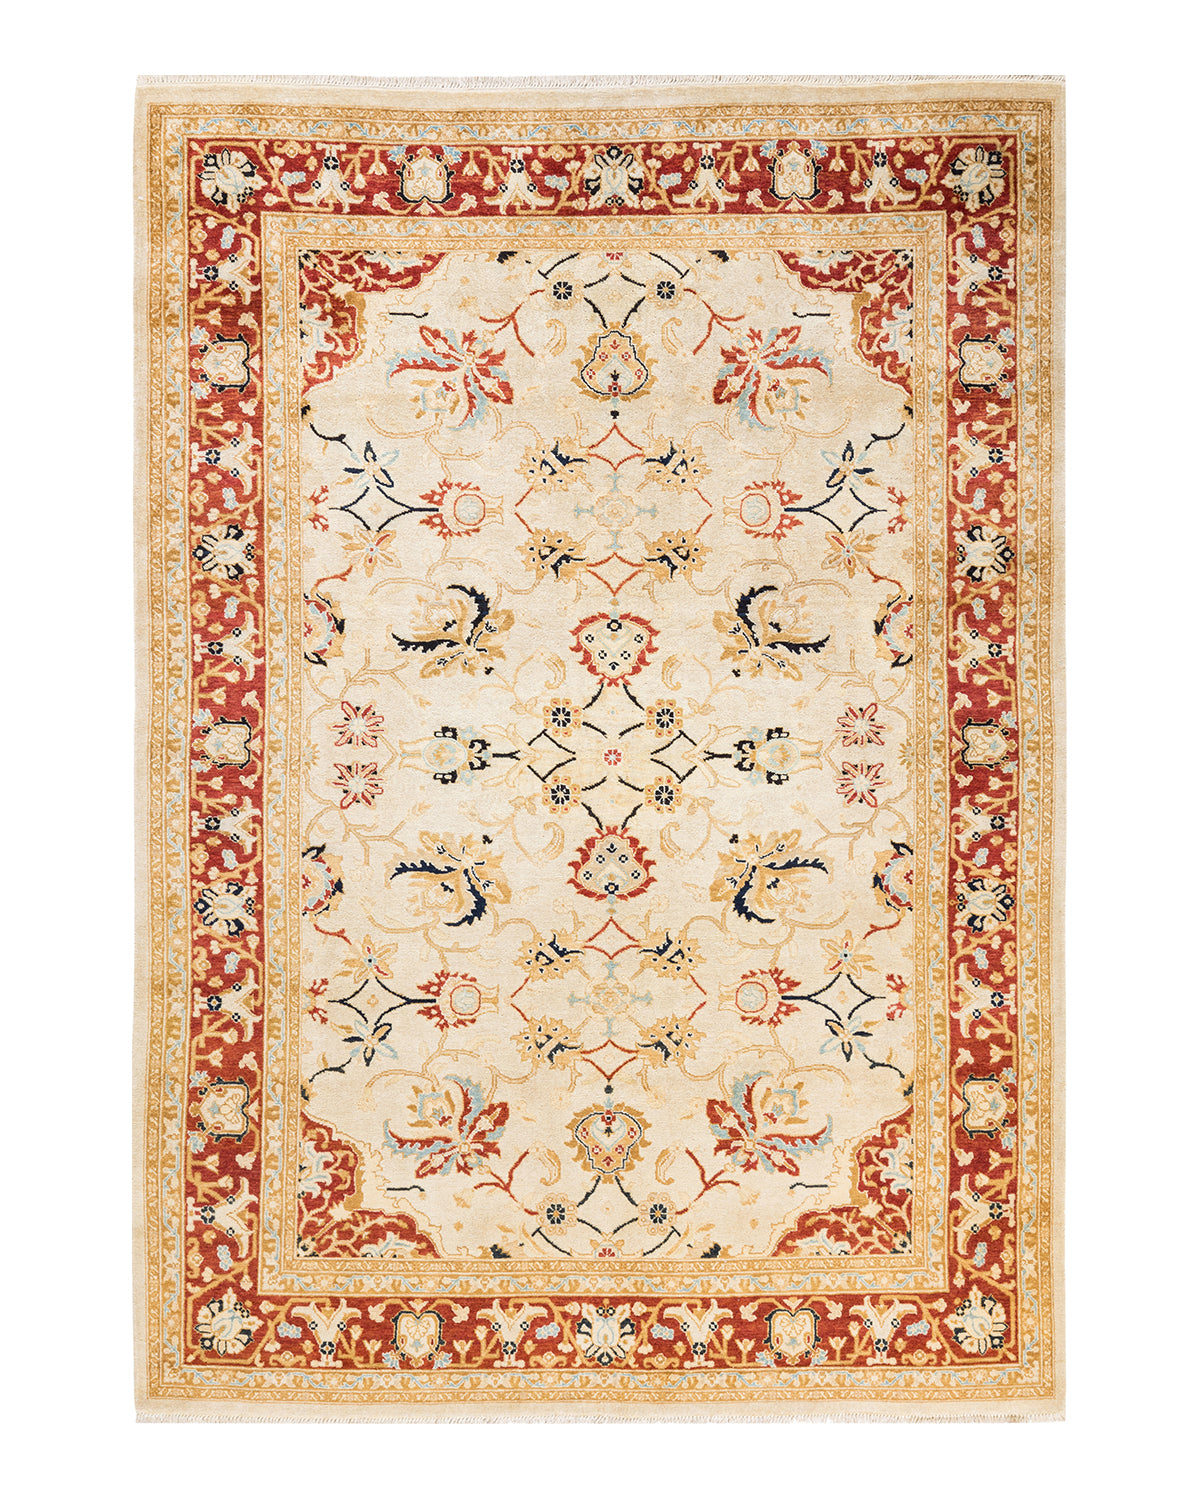 Eclectic, One-of-a-Kind Hand-Knotted Area Rug  - Ivory, 6' 1" x 8' 7"